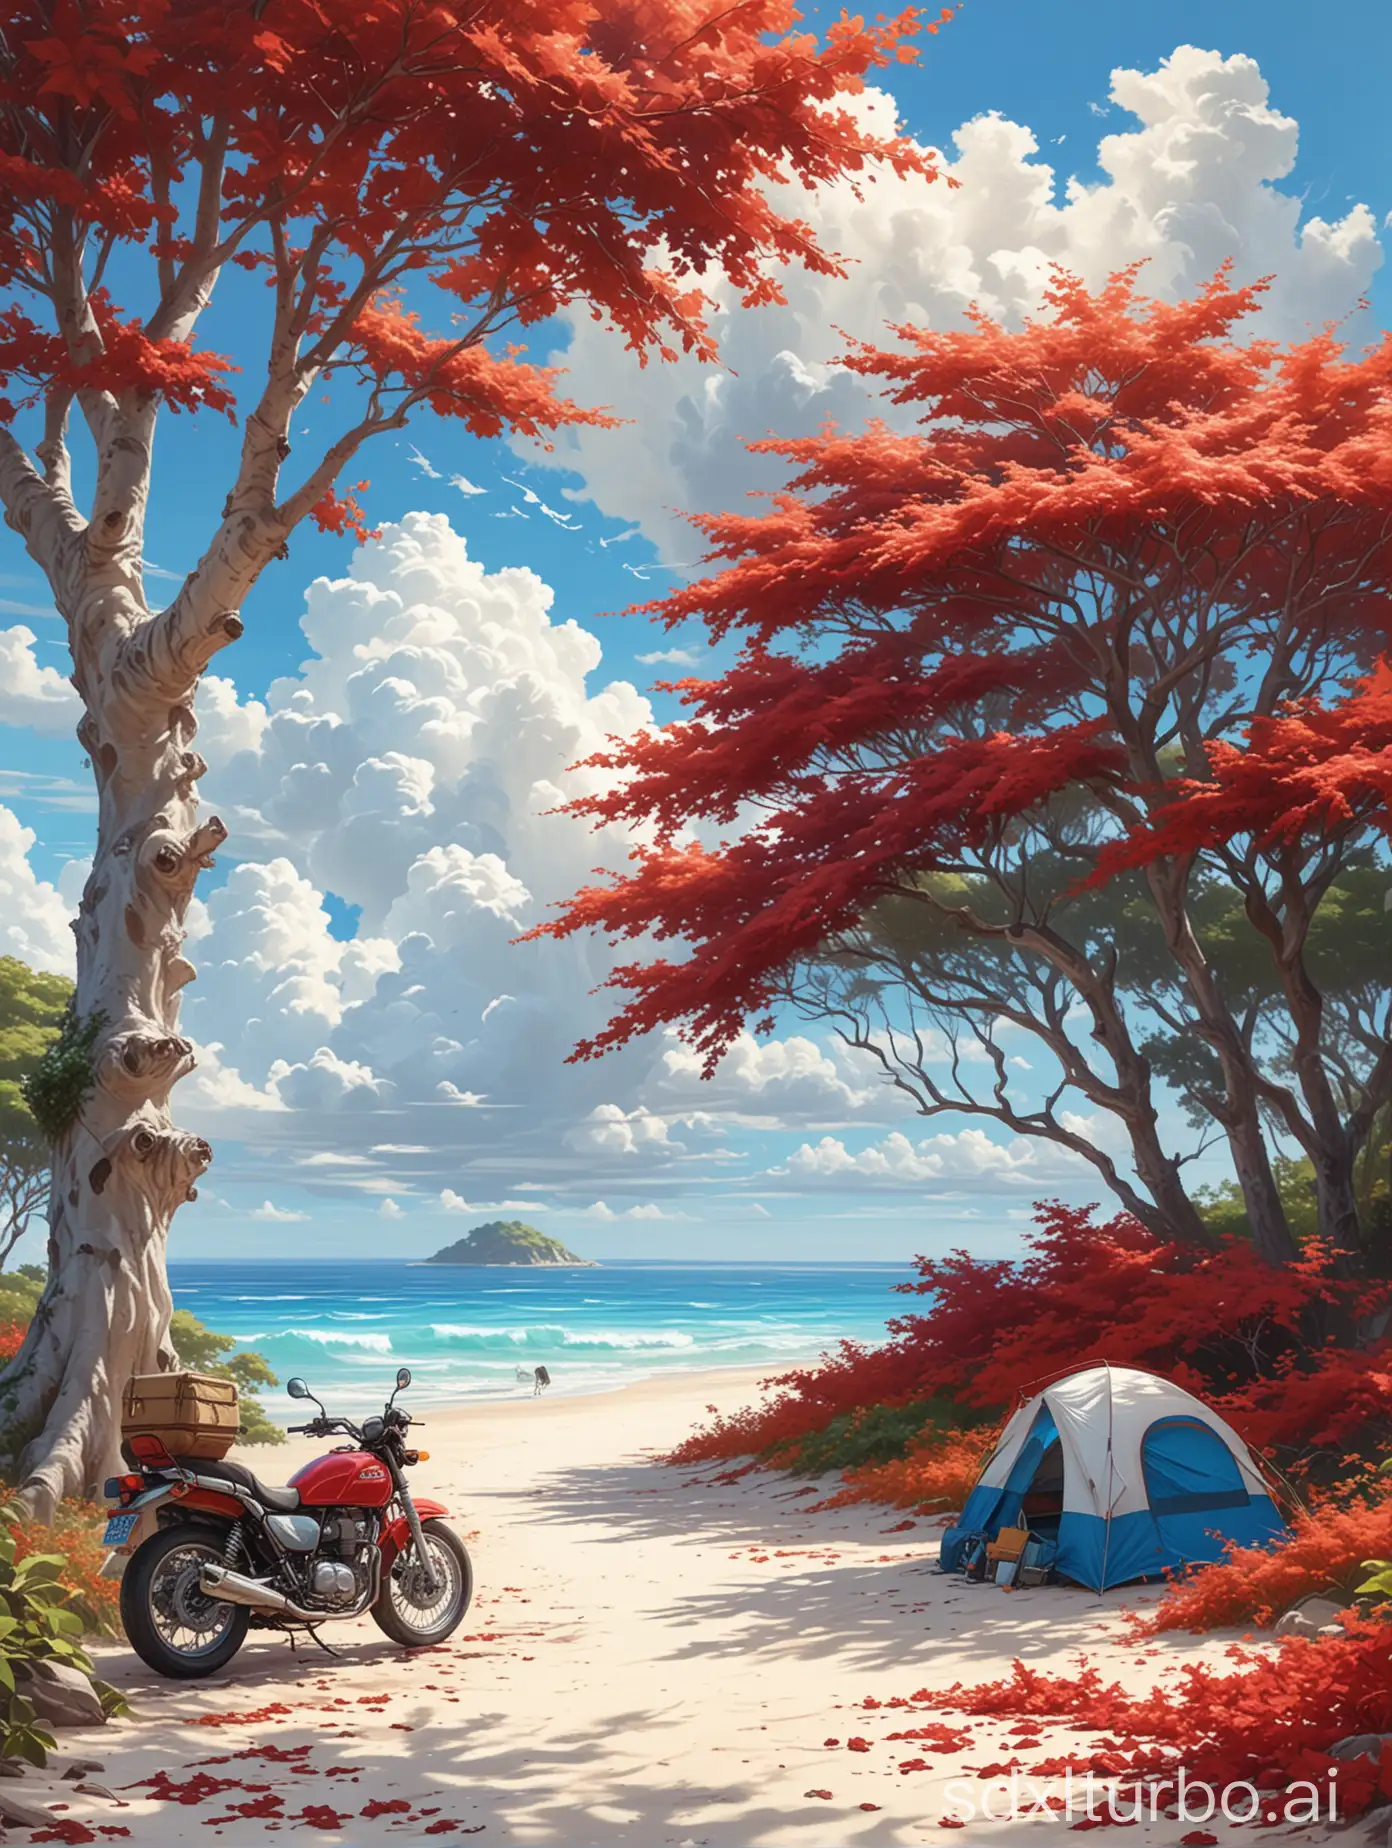 Scenic-Coastal-Landscape-with-Tree-Motorcycle-and-Tent